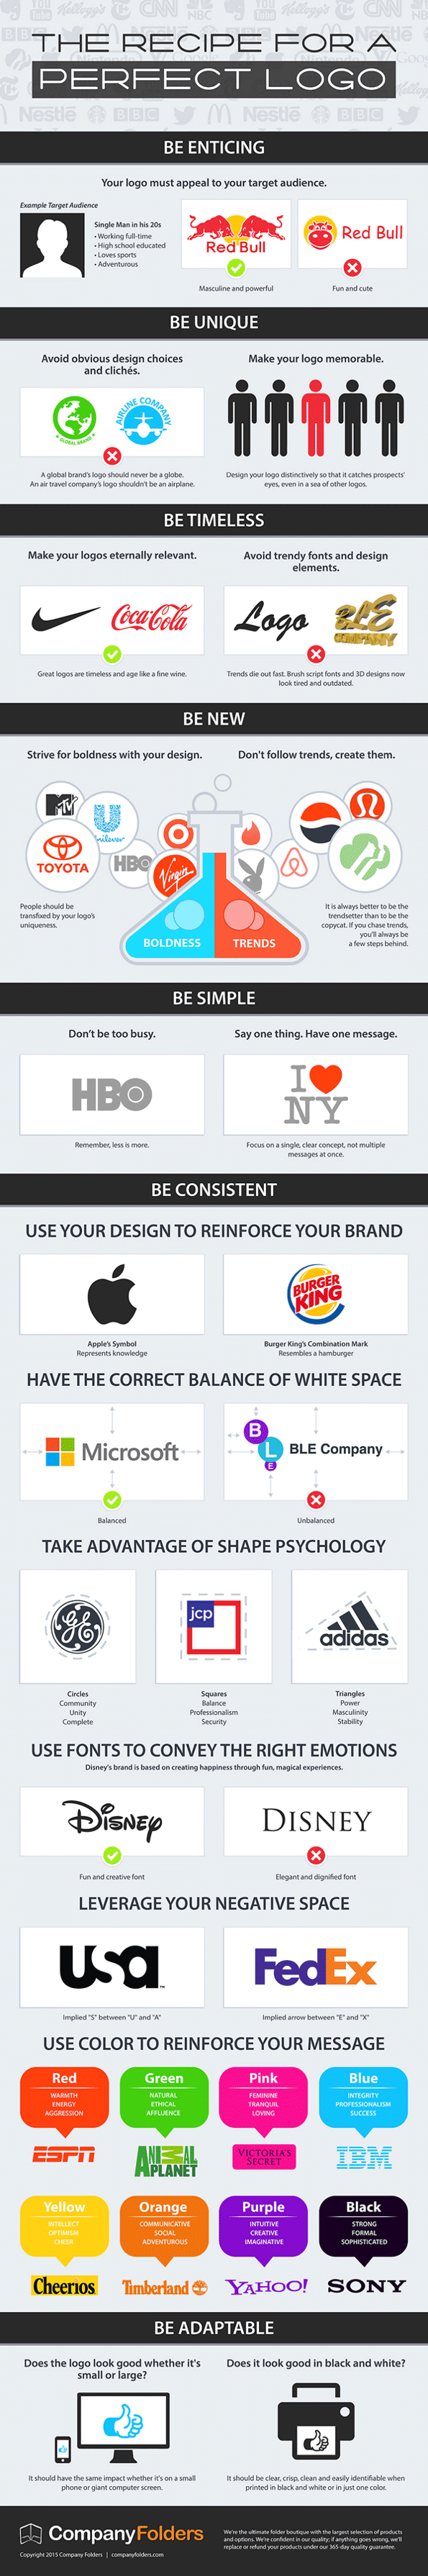 How to Create an Awesome Logo for Your Business Infographic image